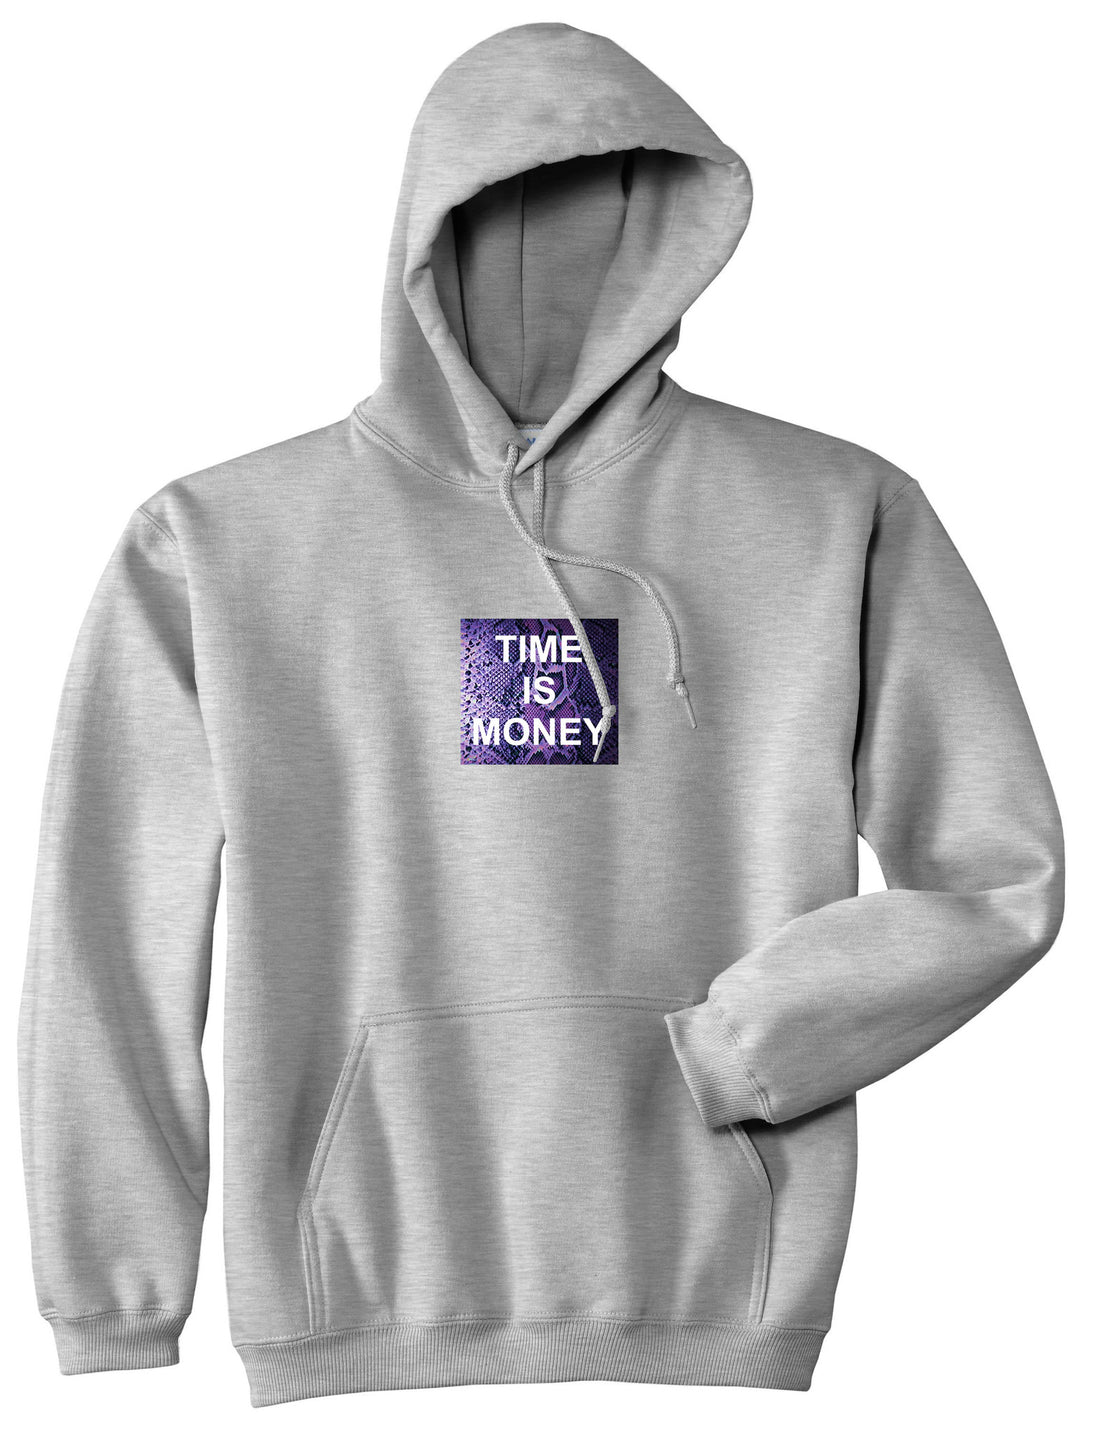 Time Is Money Snakesin Print Pullover Hoodie in Grey By Kings Of NY